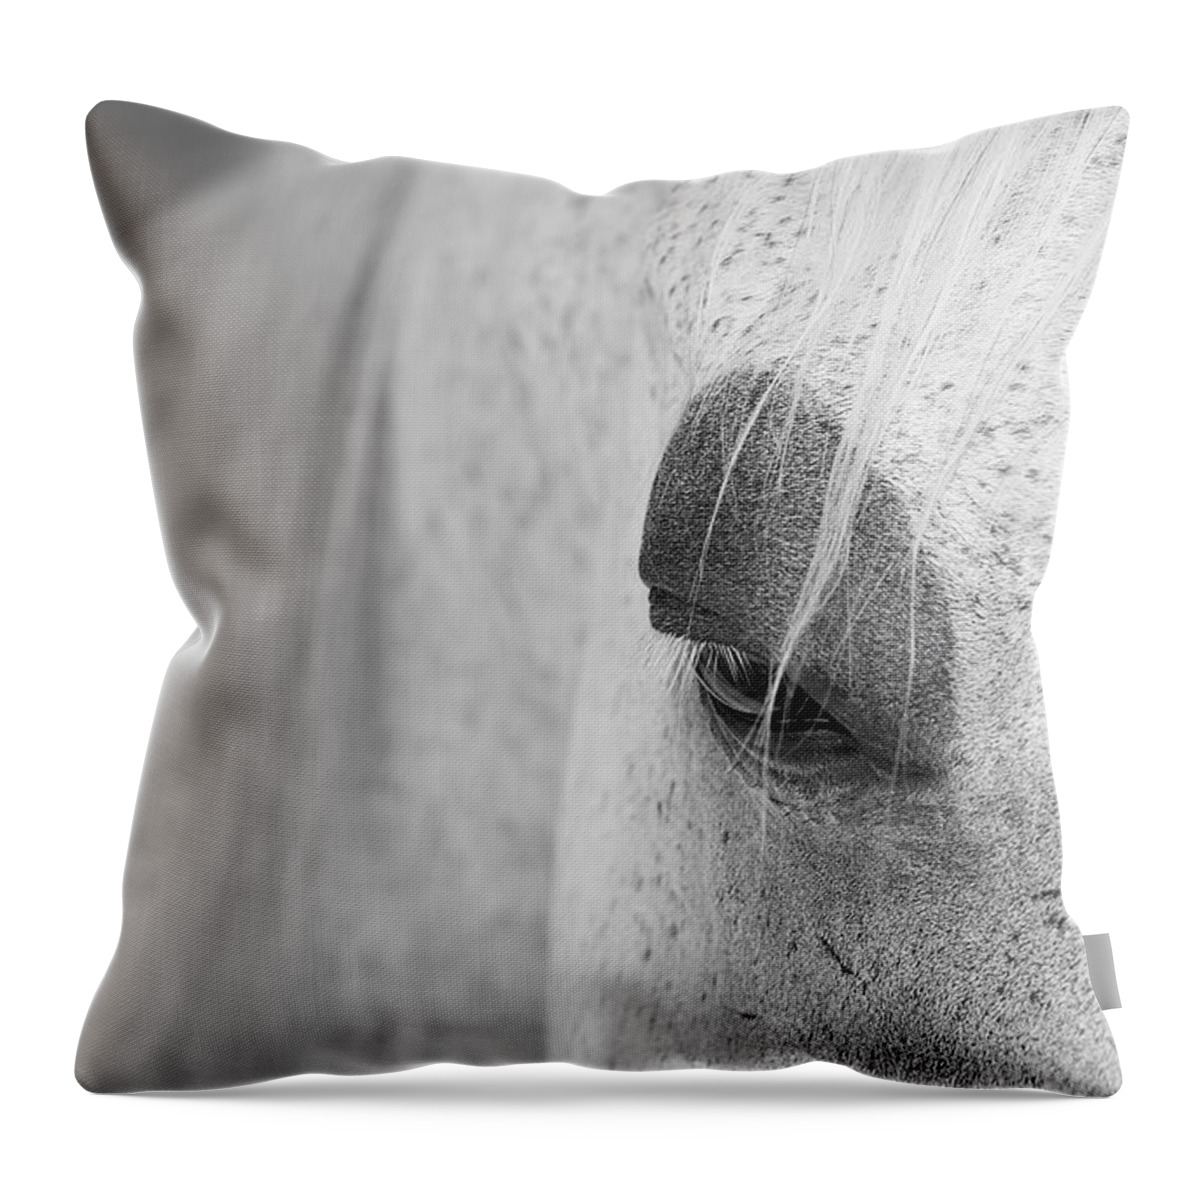 Animals Throw Pillow featuring the photograph Appaloosa Eye by Mary Lee Dereske